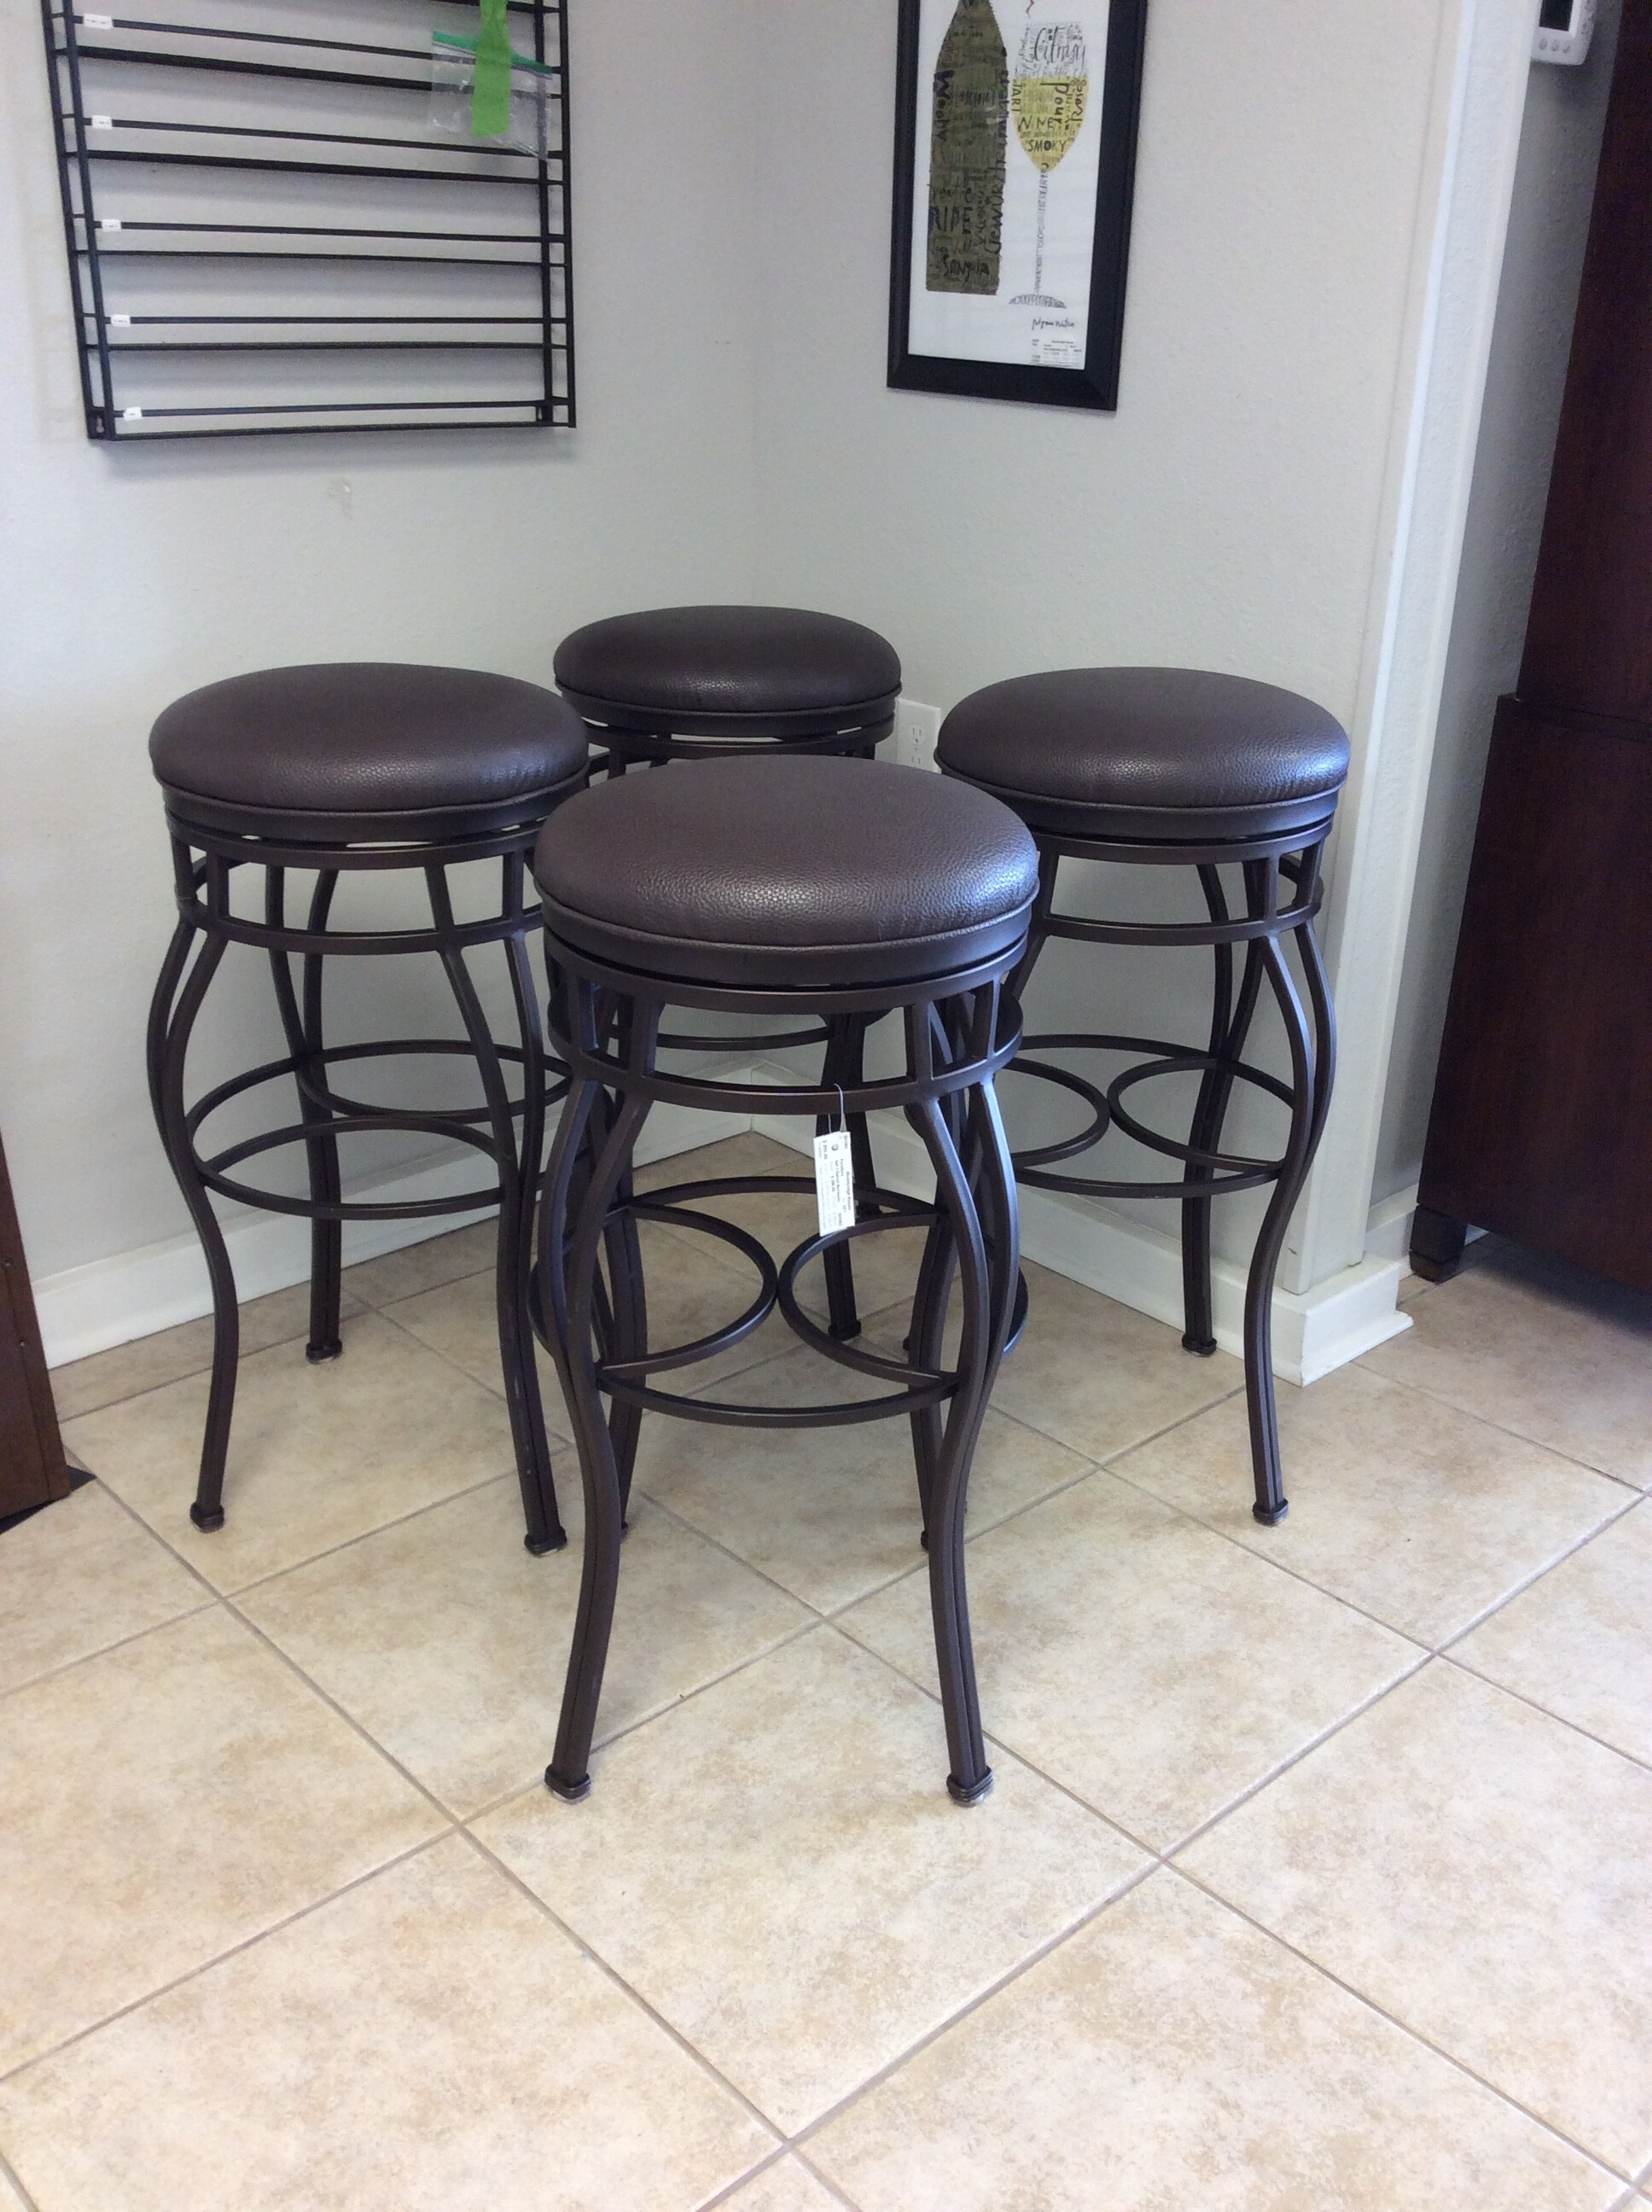 This is a very nice set of 4 swiveling barstools. Contemporary in style, they are a lovely combination of metal and leather.